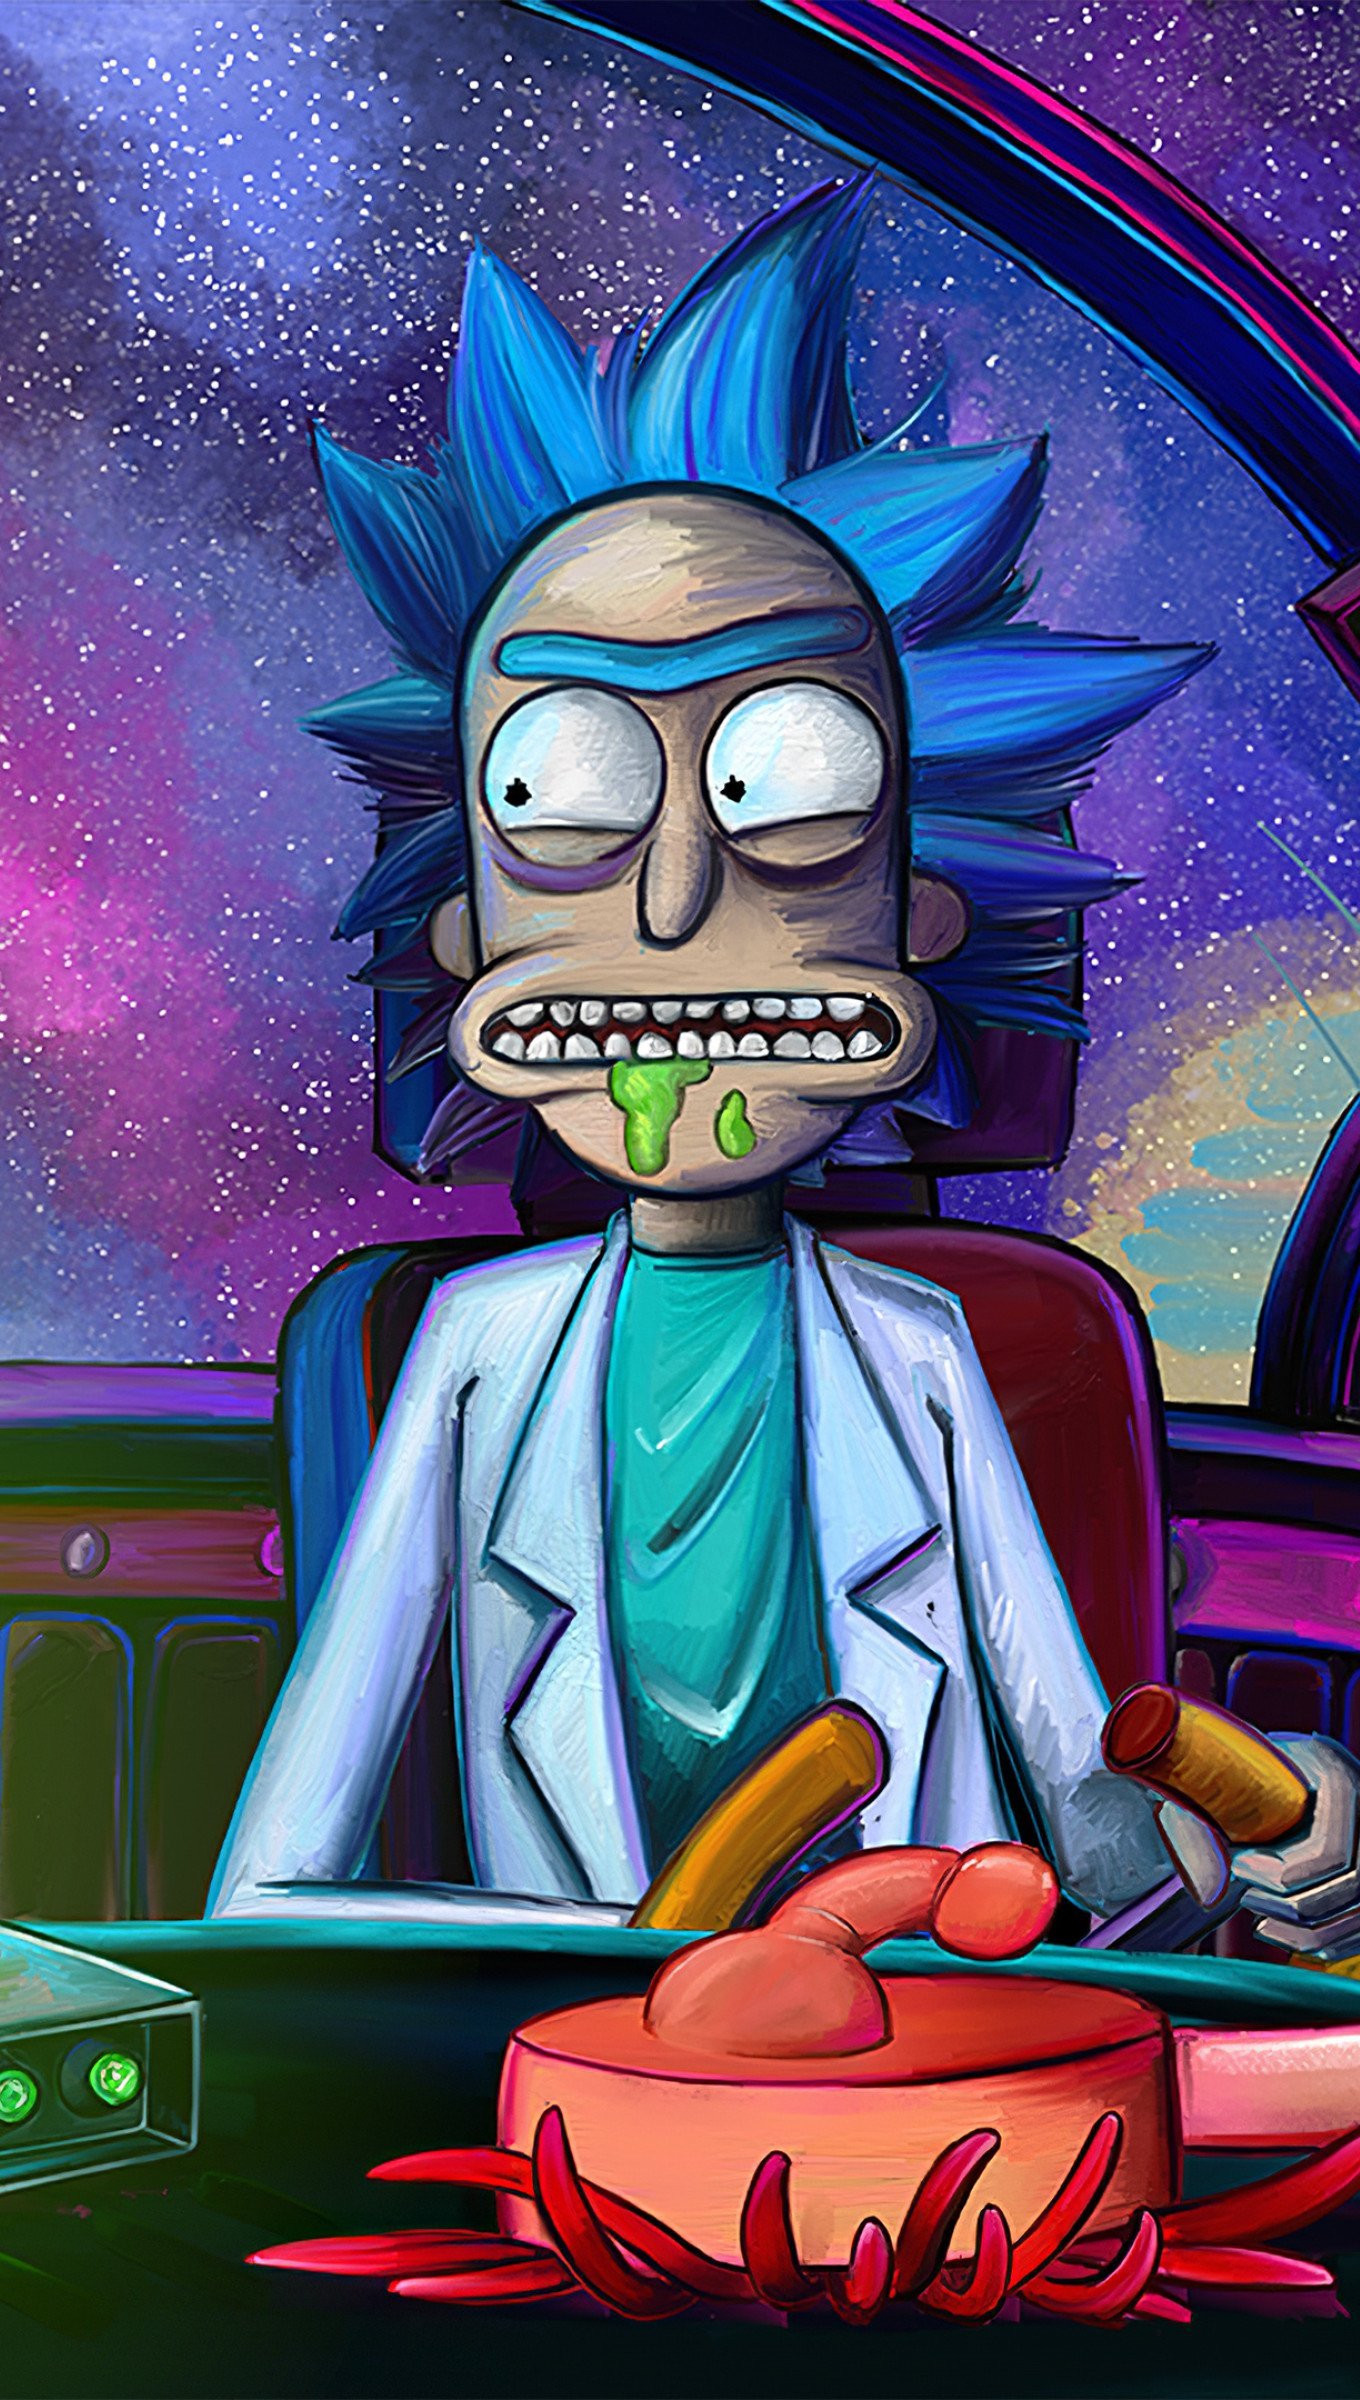 Rick and Morty in space ship Wallpaper 4k Ultra HD ID:4518